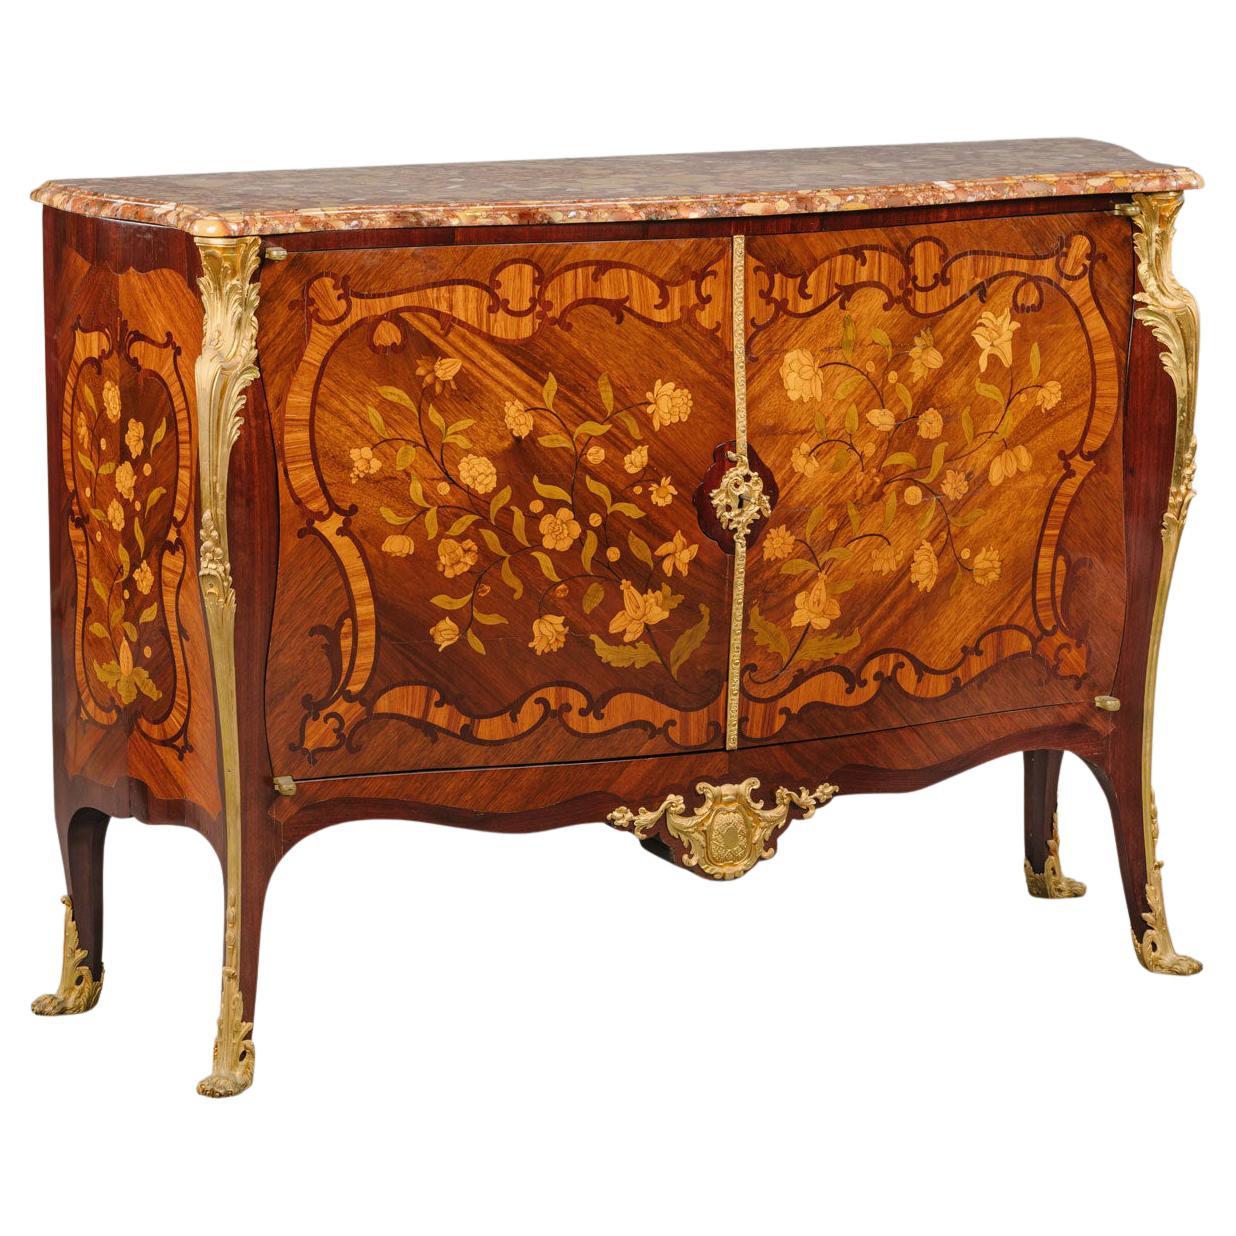 Fine Louis XV Style Gilt-Bronze Mounted Marquetry Inlaid Commode For Sale